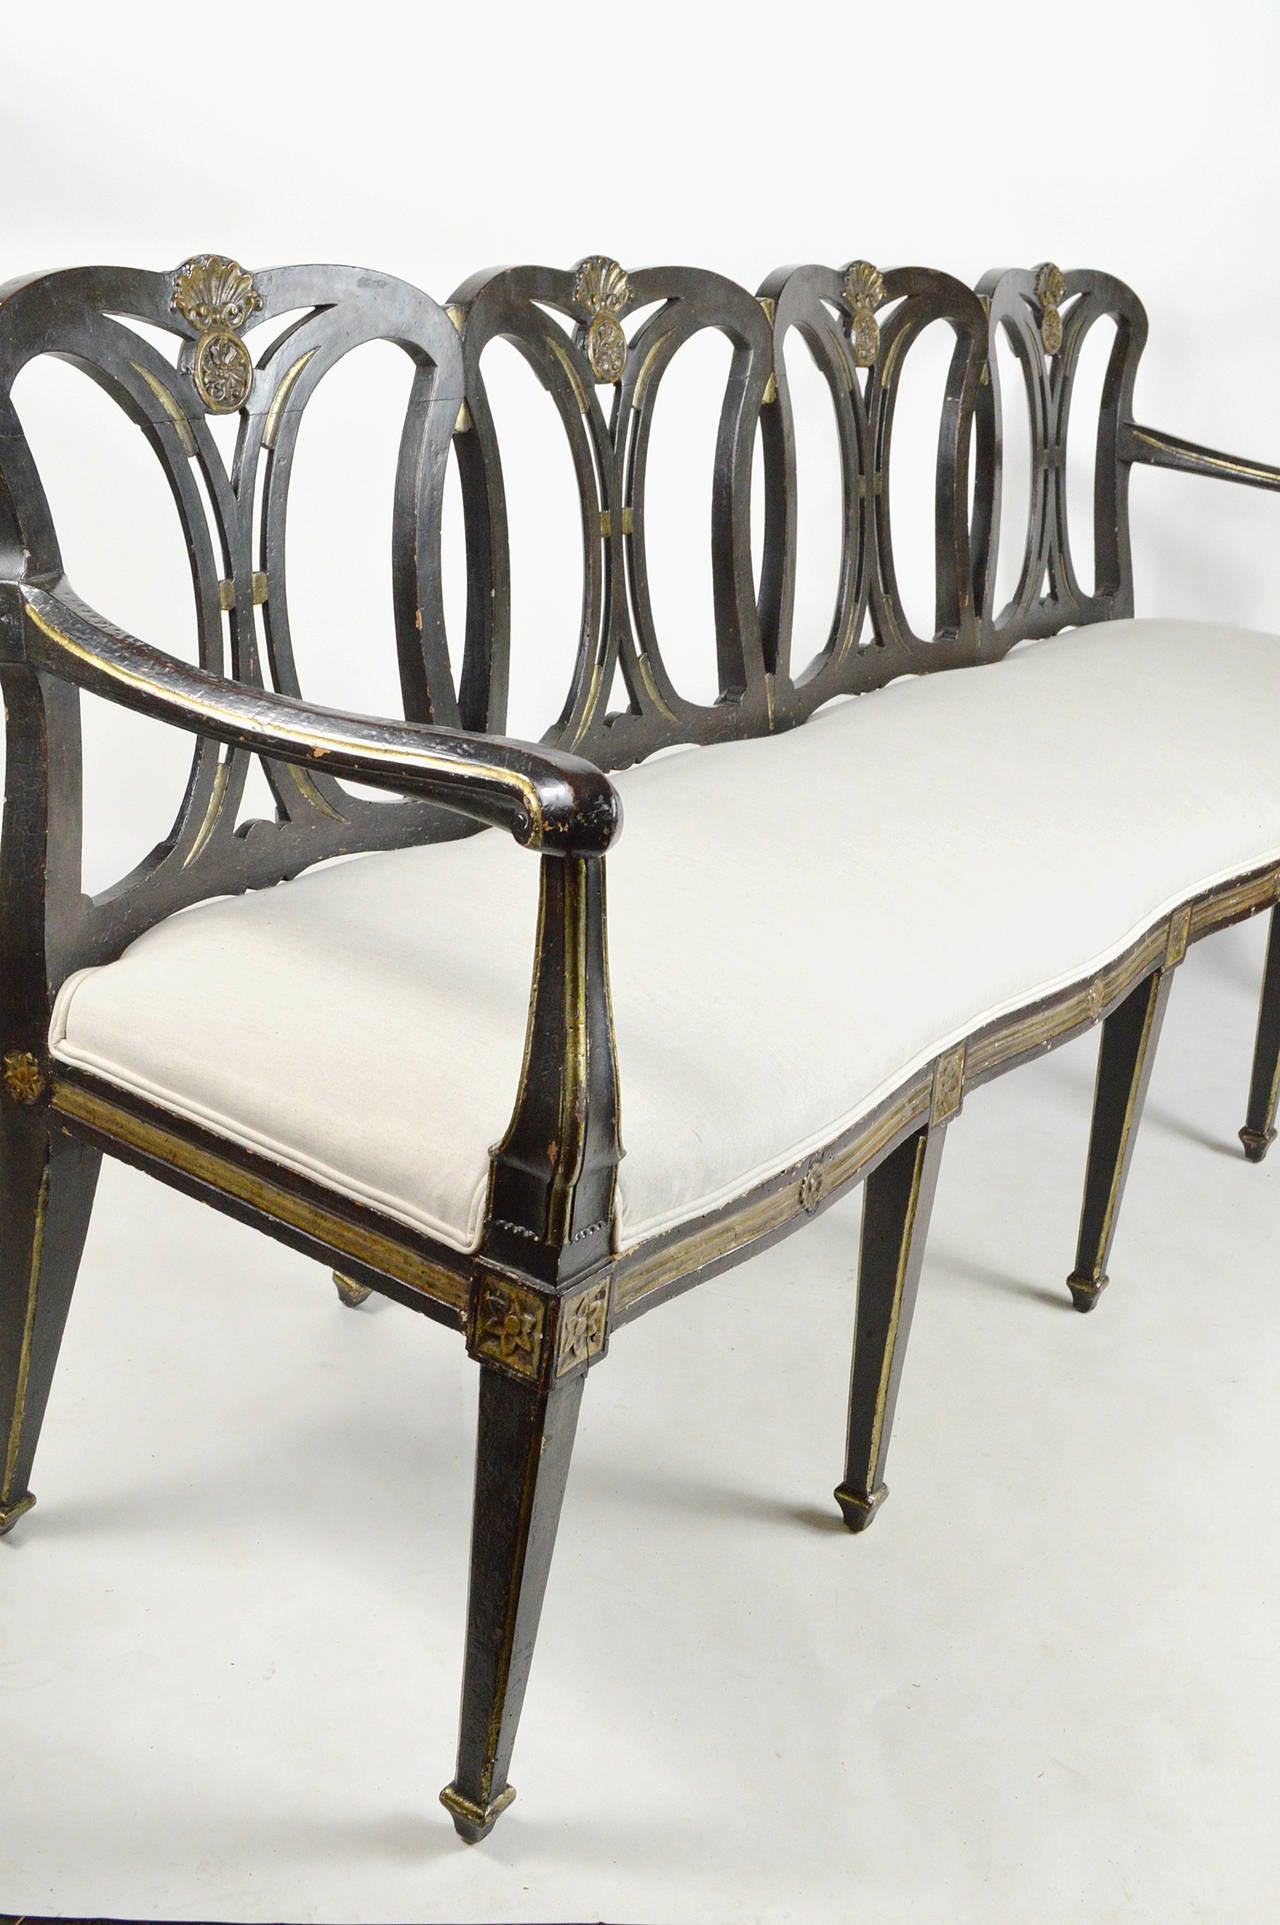 A fine 19th century neoclassical style black painted and parcel-gilt bench. Frame with shell and circular medallion accents on an arched slat back. Bench with serpentine front with gilt accents on apron, above ten tapered legs with spade feet.